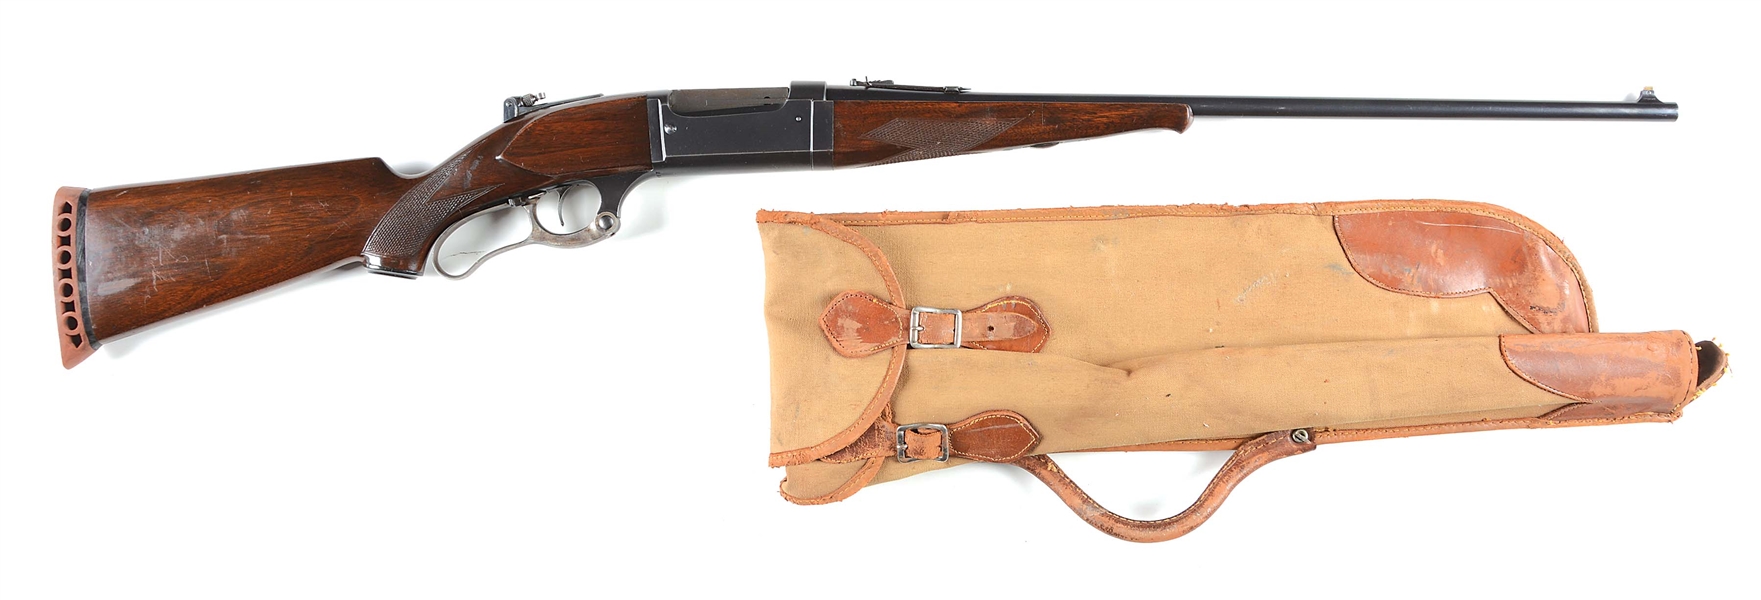 (C) FINE SAVAGE MODEL 1899 TAKEDOWN LEVER ACTION RIFLE (1923).